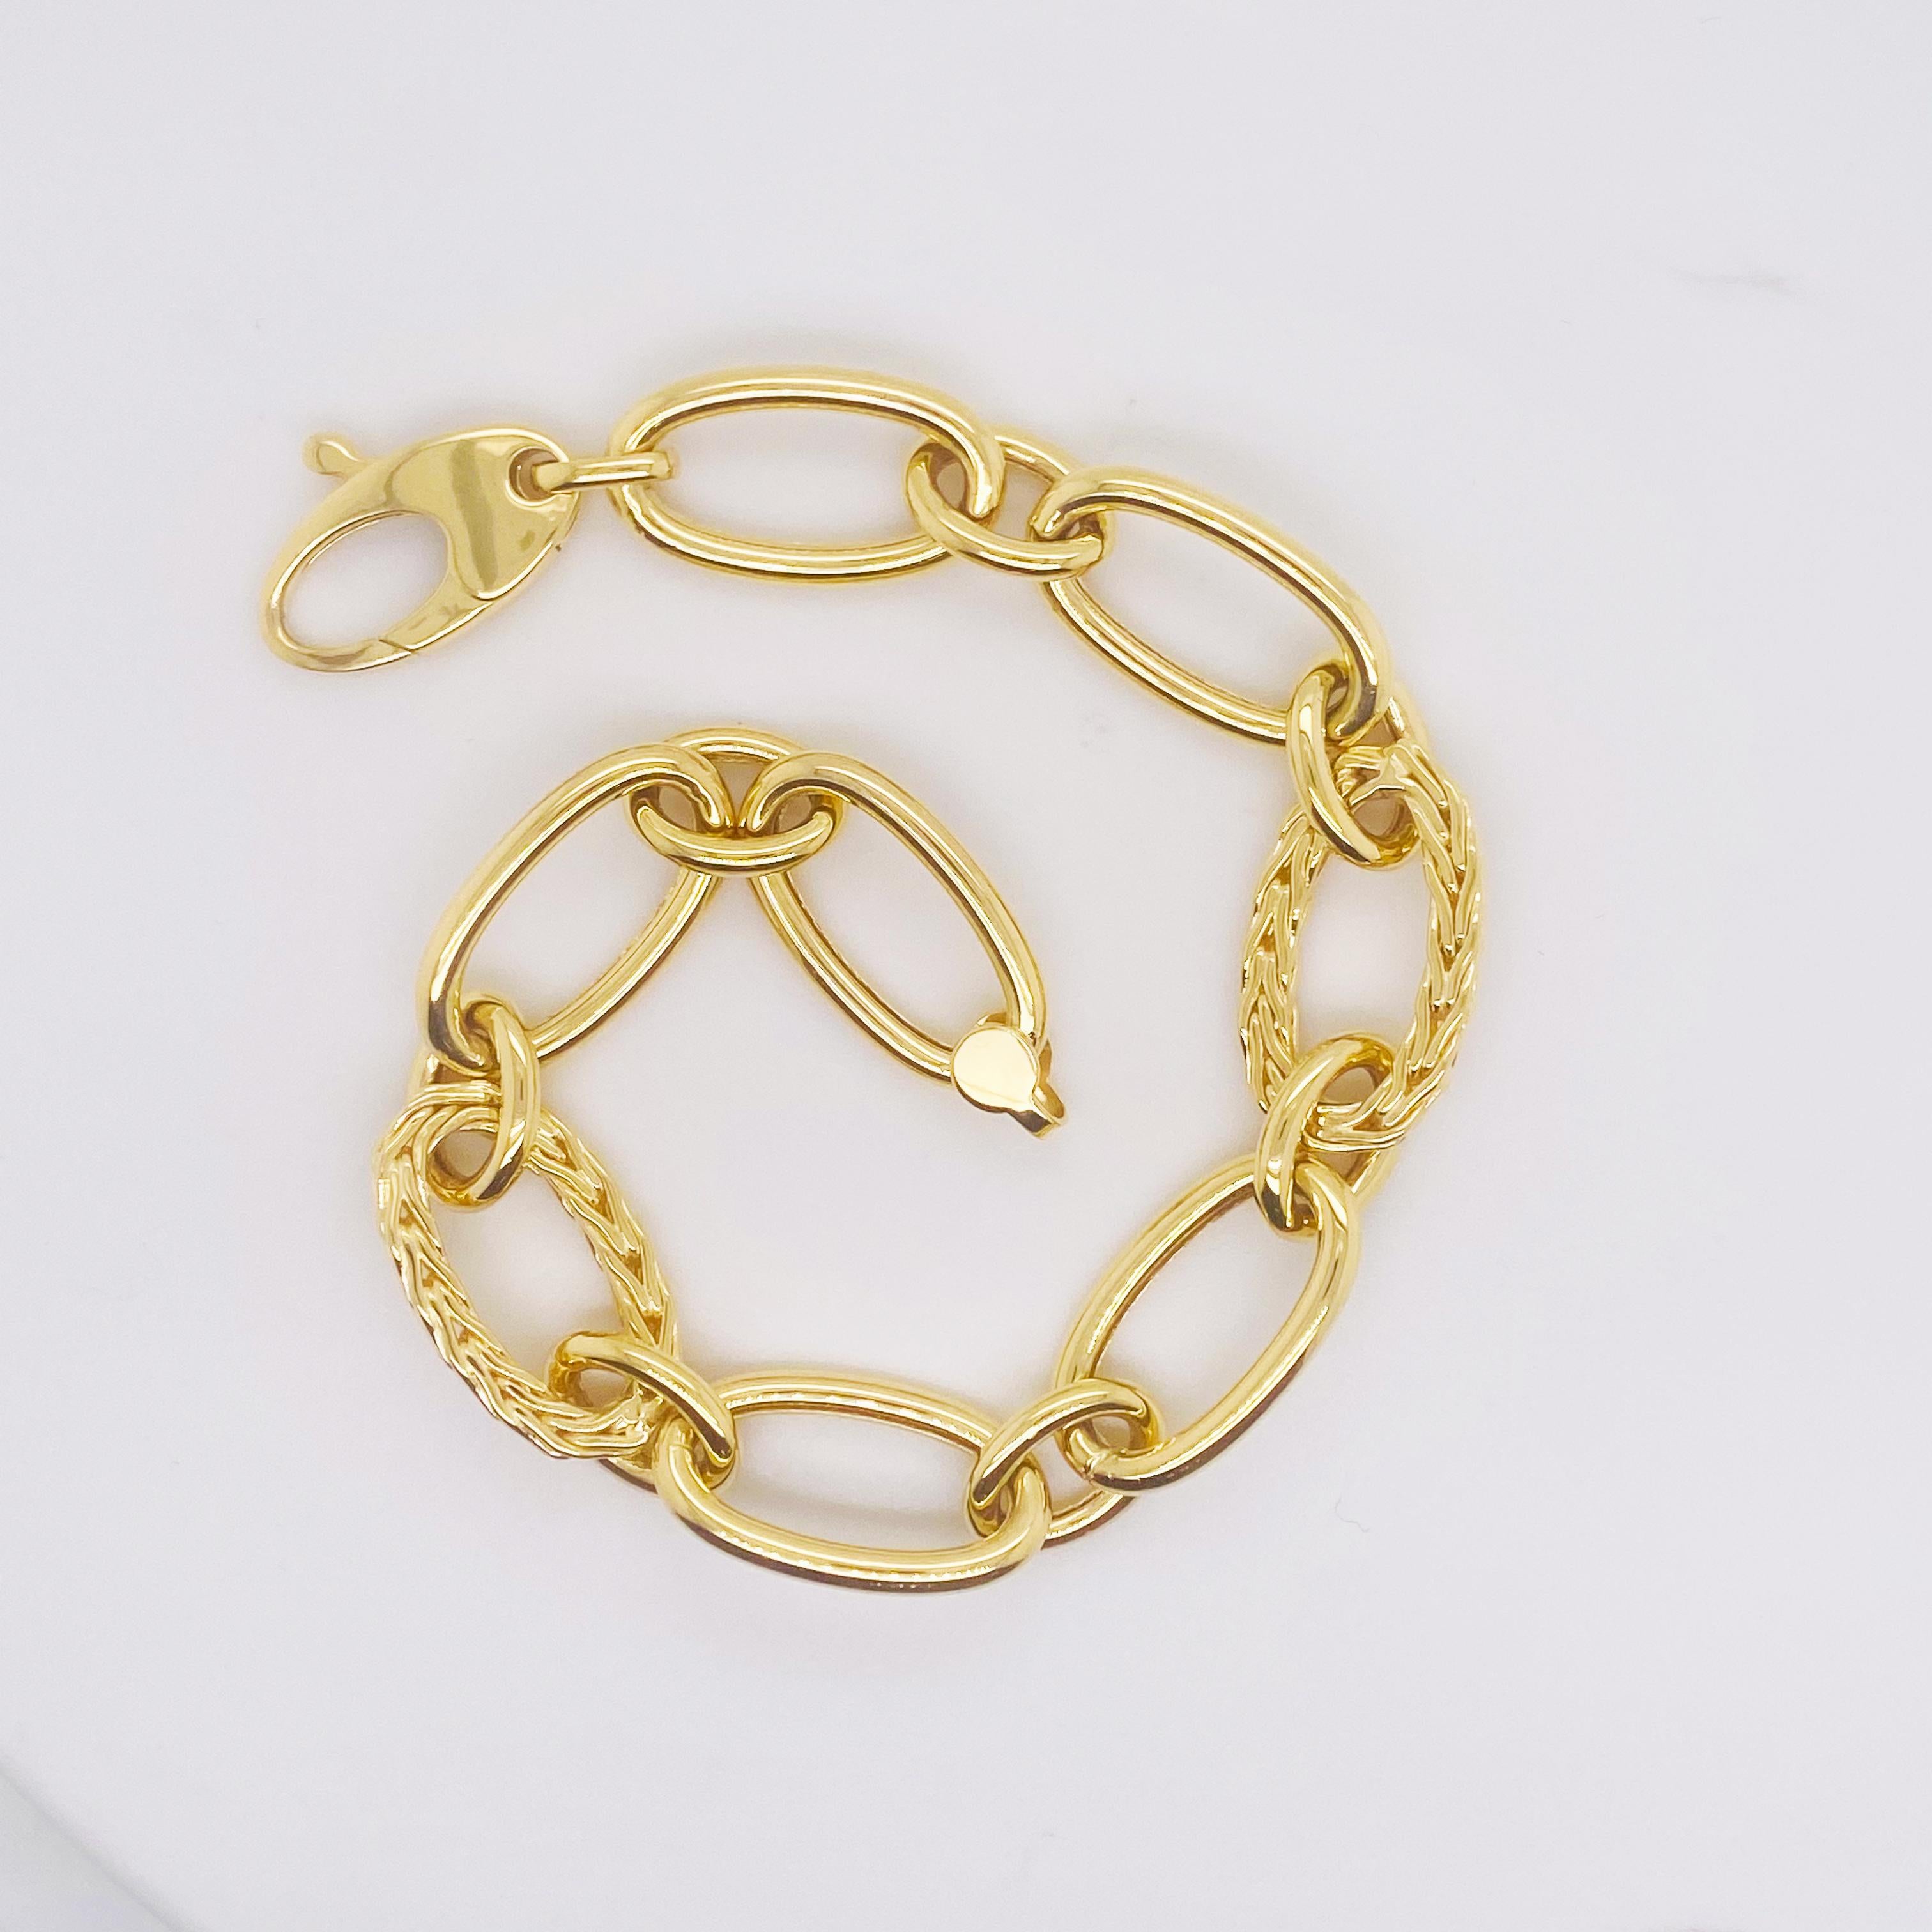 This 14 karat yellow gold bold gold bracelet makes a statement! Feel like a million dollars when you wear this link bracelet! 
2 Wheat Chain Links
13 High-Polished Links
Material: 14K Yellow Gold 
Width: 1mm wide 
Gram Weight: Approximately 12.5